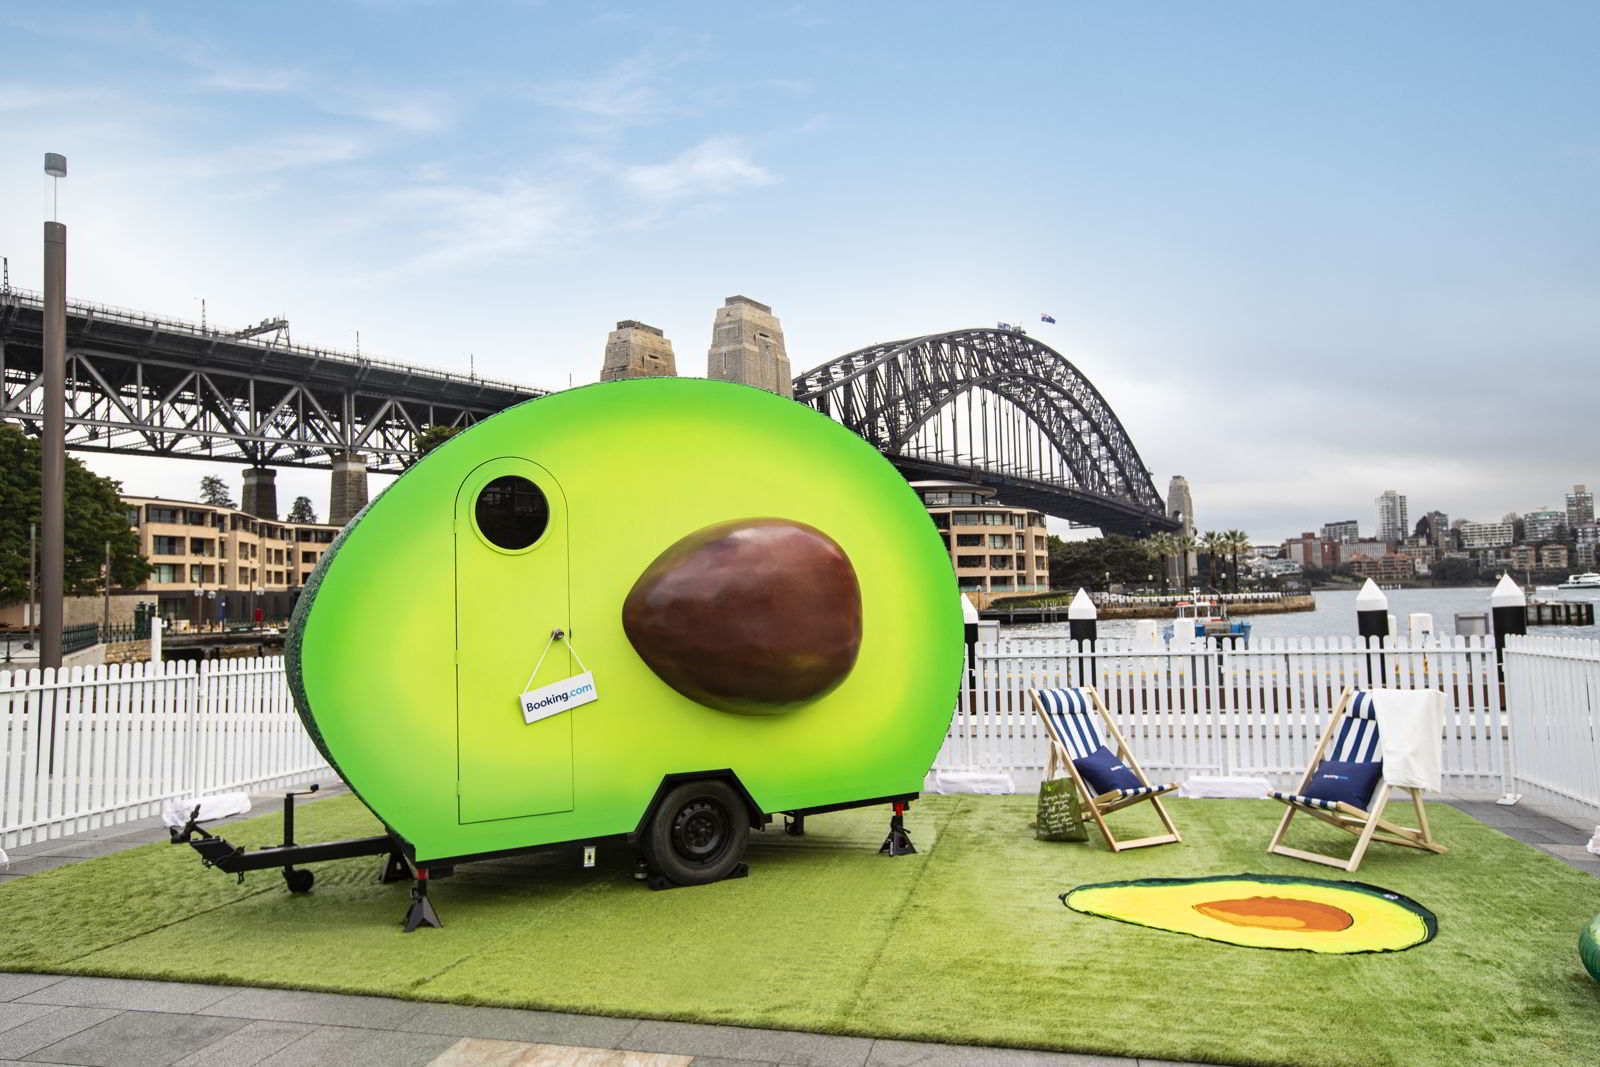 An image of the Avacondo, an avacado-shaped accommodation that can be booked with Booking.com in Sydney, Australia